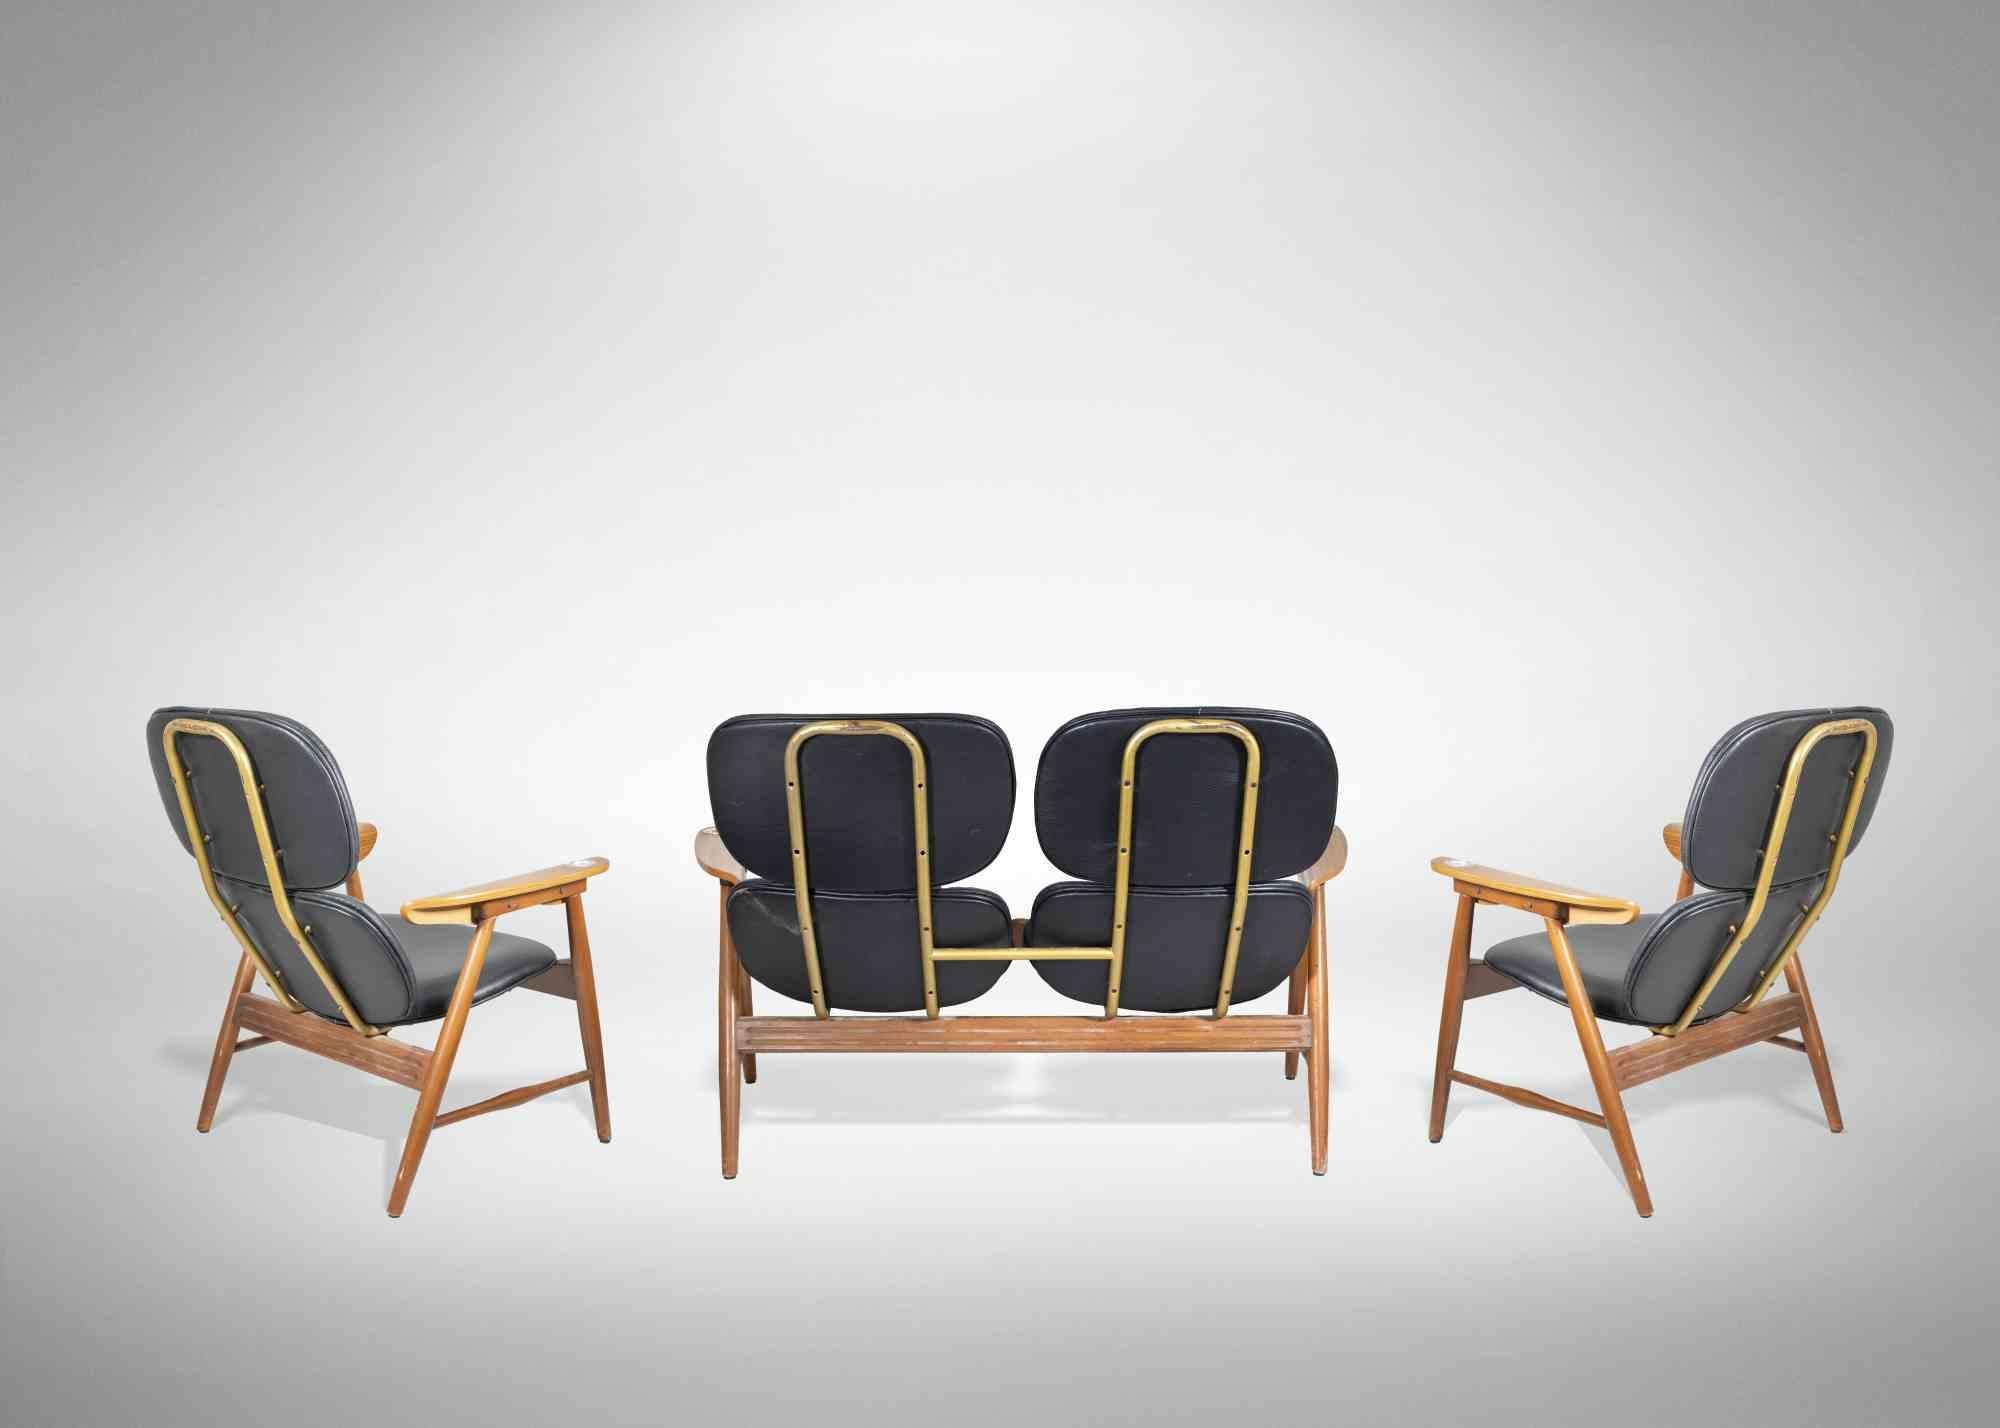 Relax sofa set is a set of tree realized by Marco Zanuso (1916-2001) for Poltronova in 1970s. 

Leather, wood, metal. Ashtrays on arms.

Coach; height 82 cm, lenght 122 cm, depth 70 cm. 

Armchair; height 80 cm, lenght 65 cm, depth 70 cm.